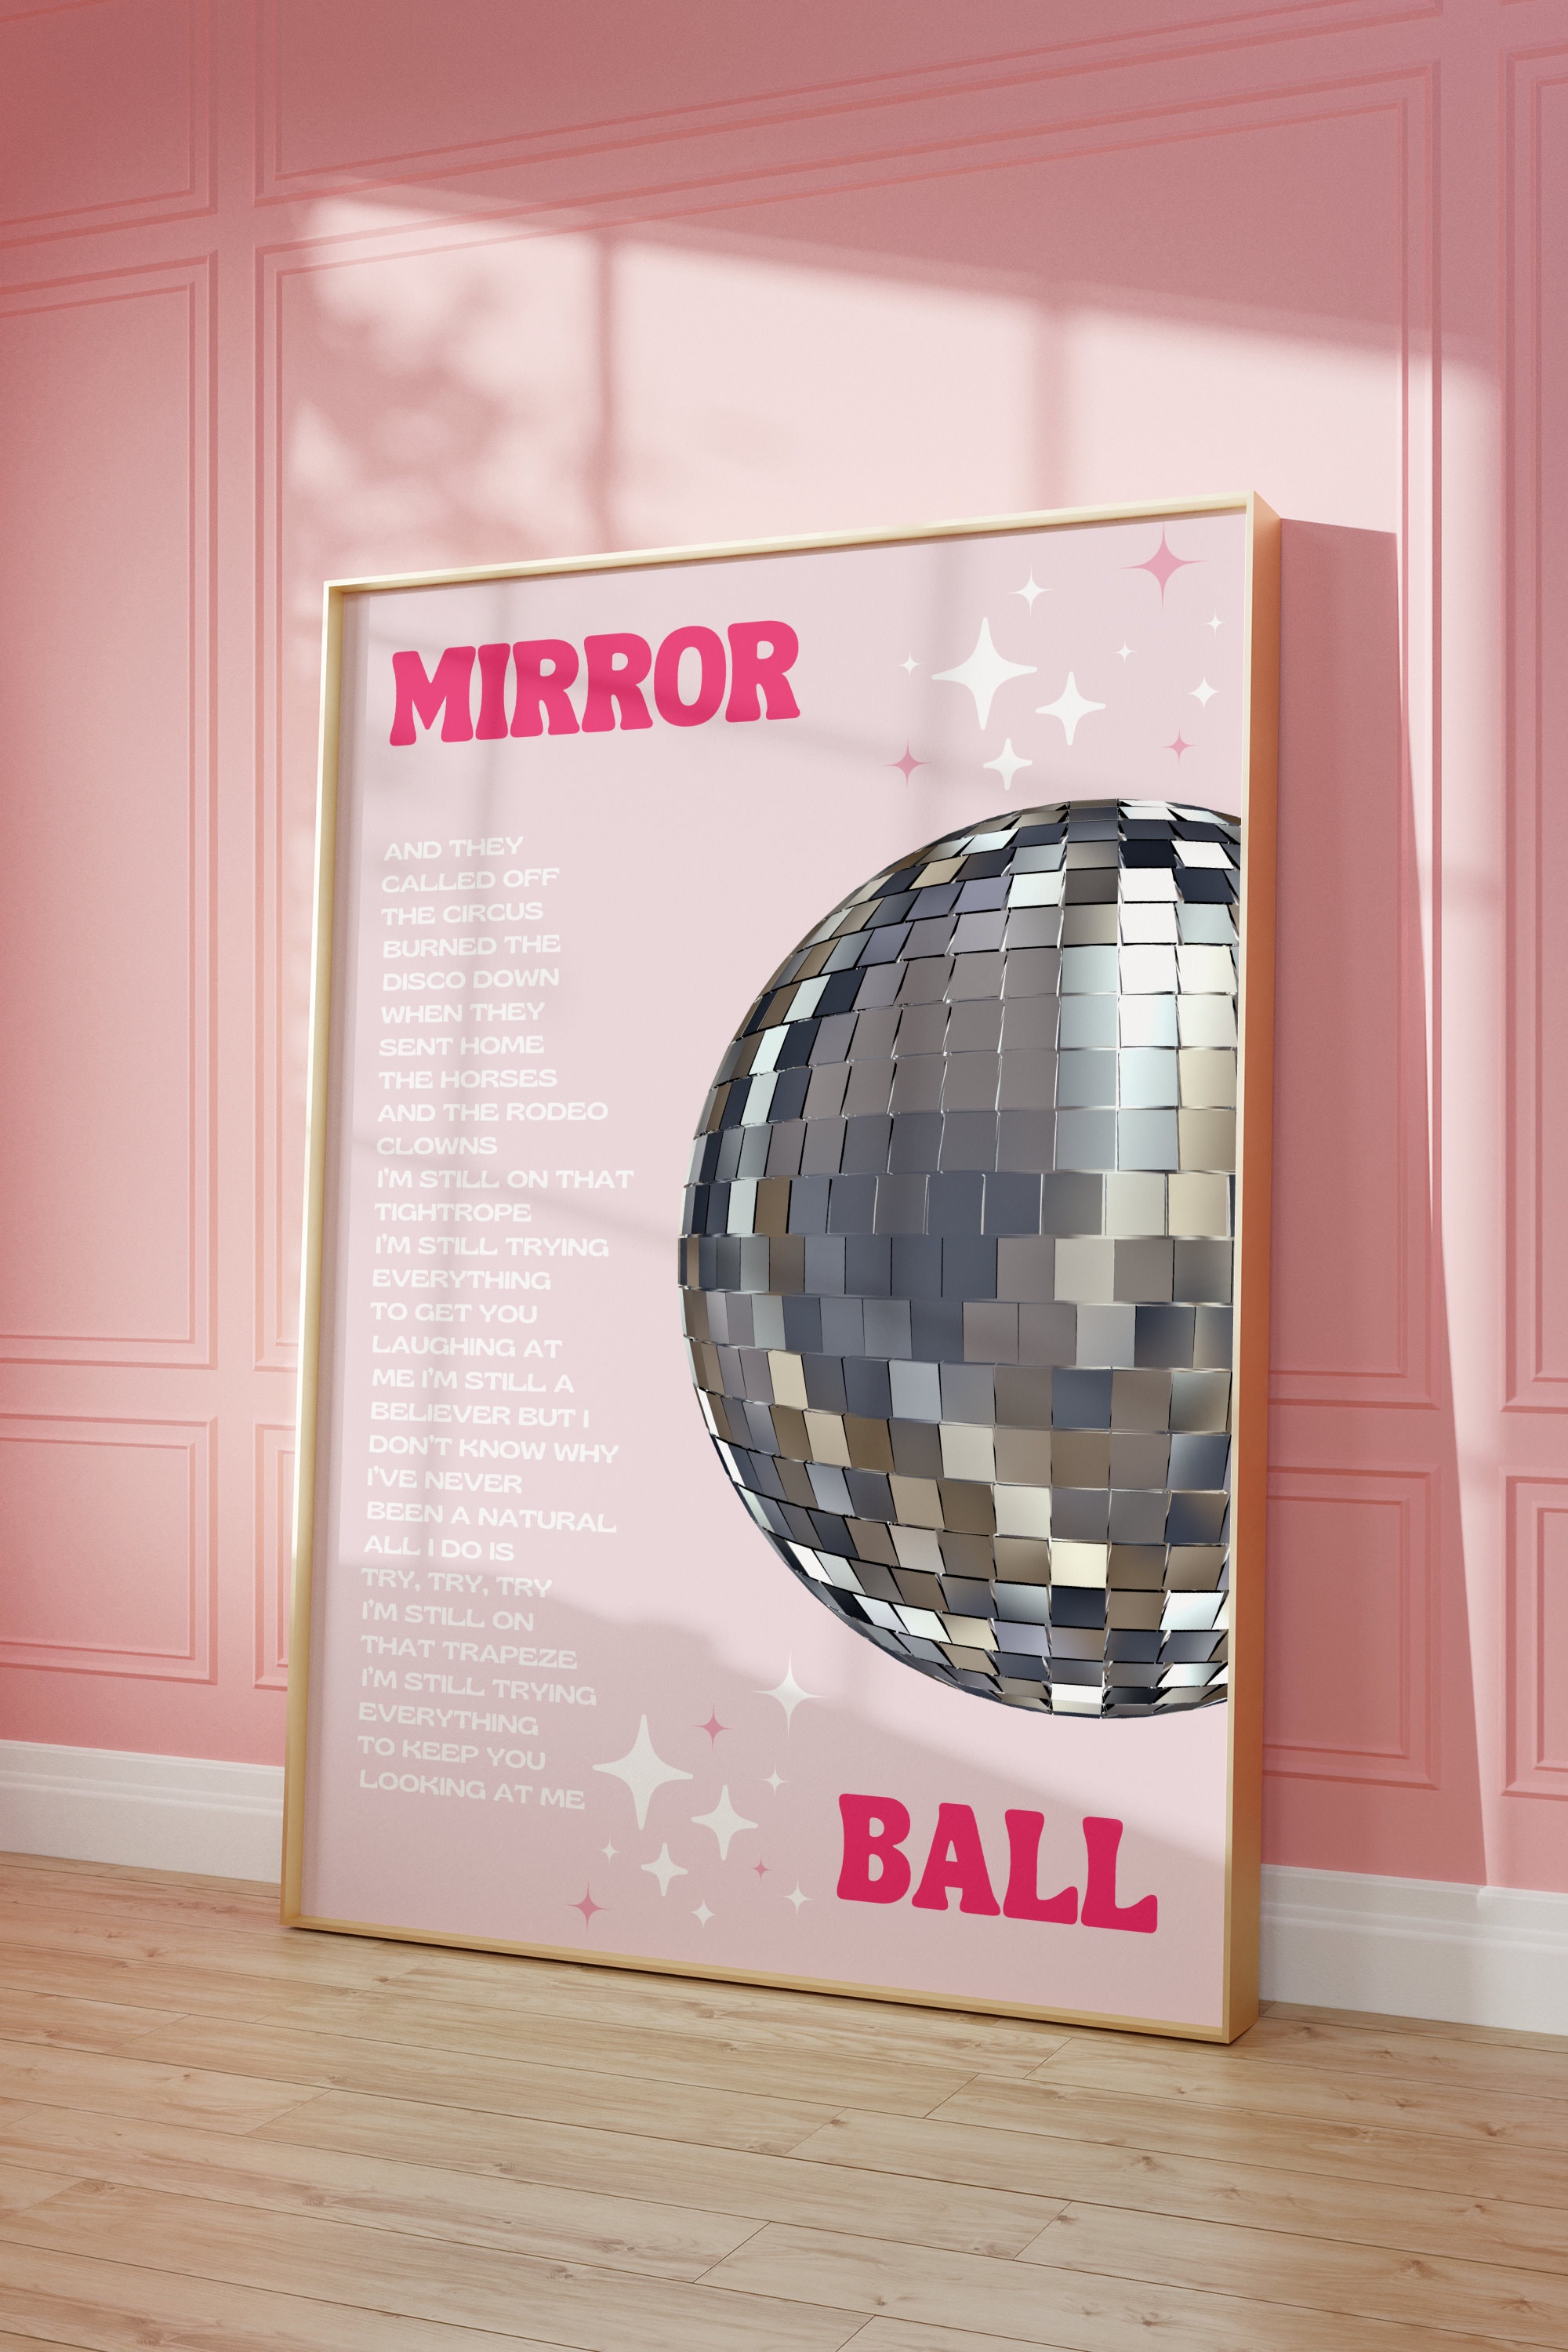 Disco ball wall hangers, pink/rose gold or silver mirror tiles